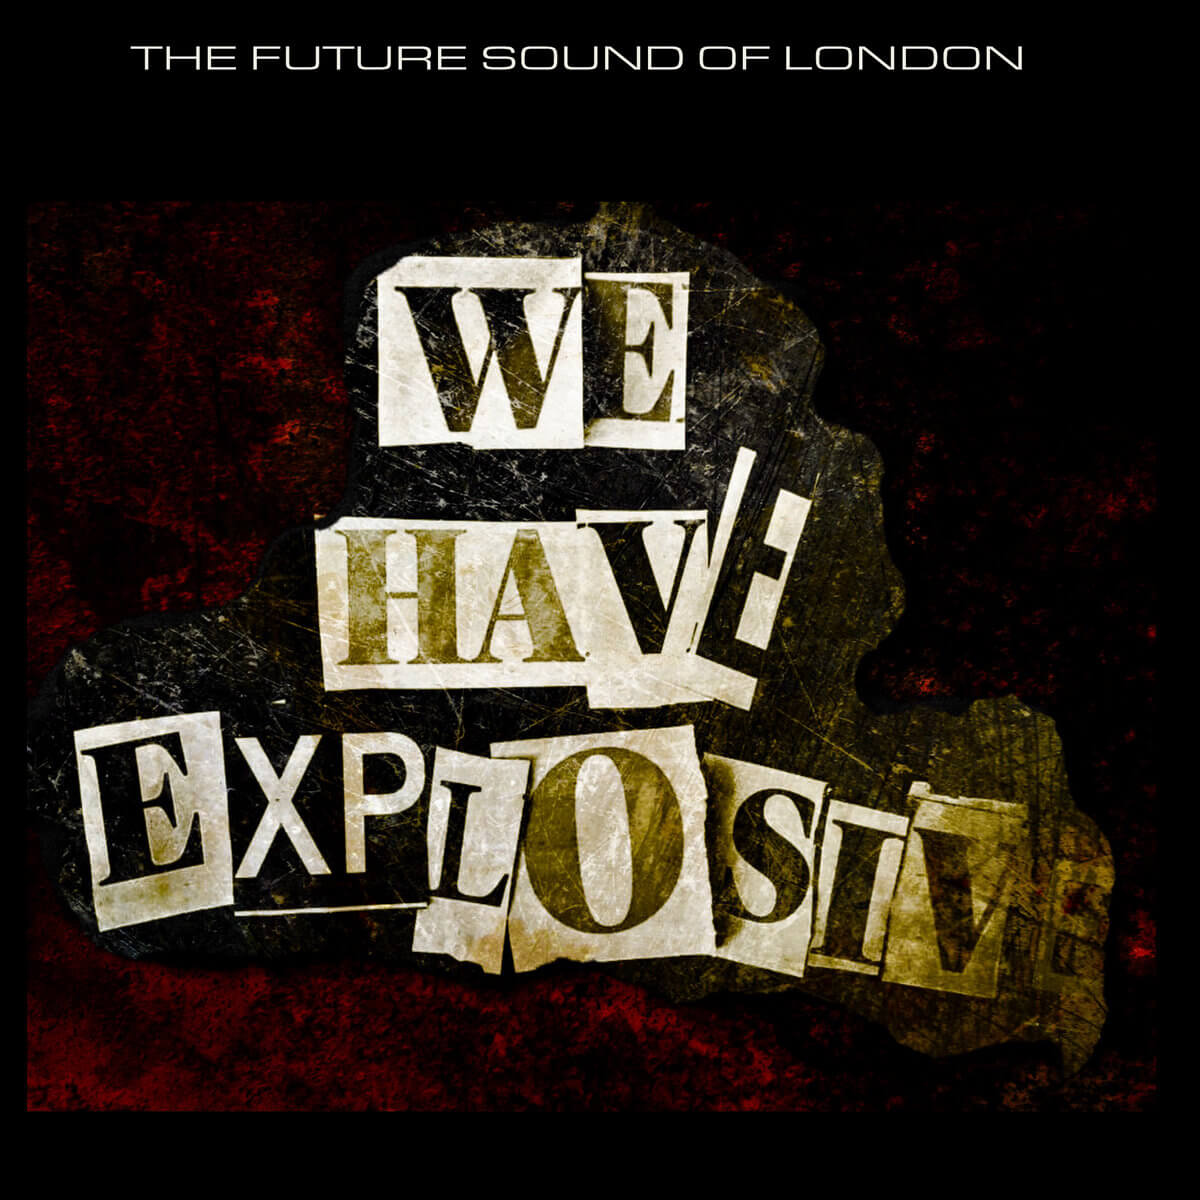 future sound of london we have explosive 2021 CD